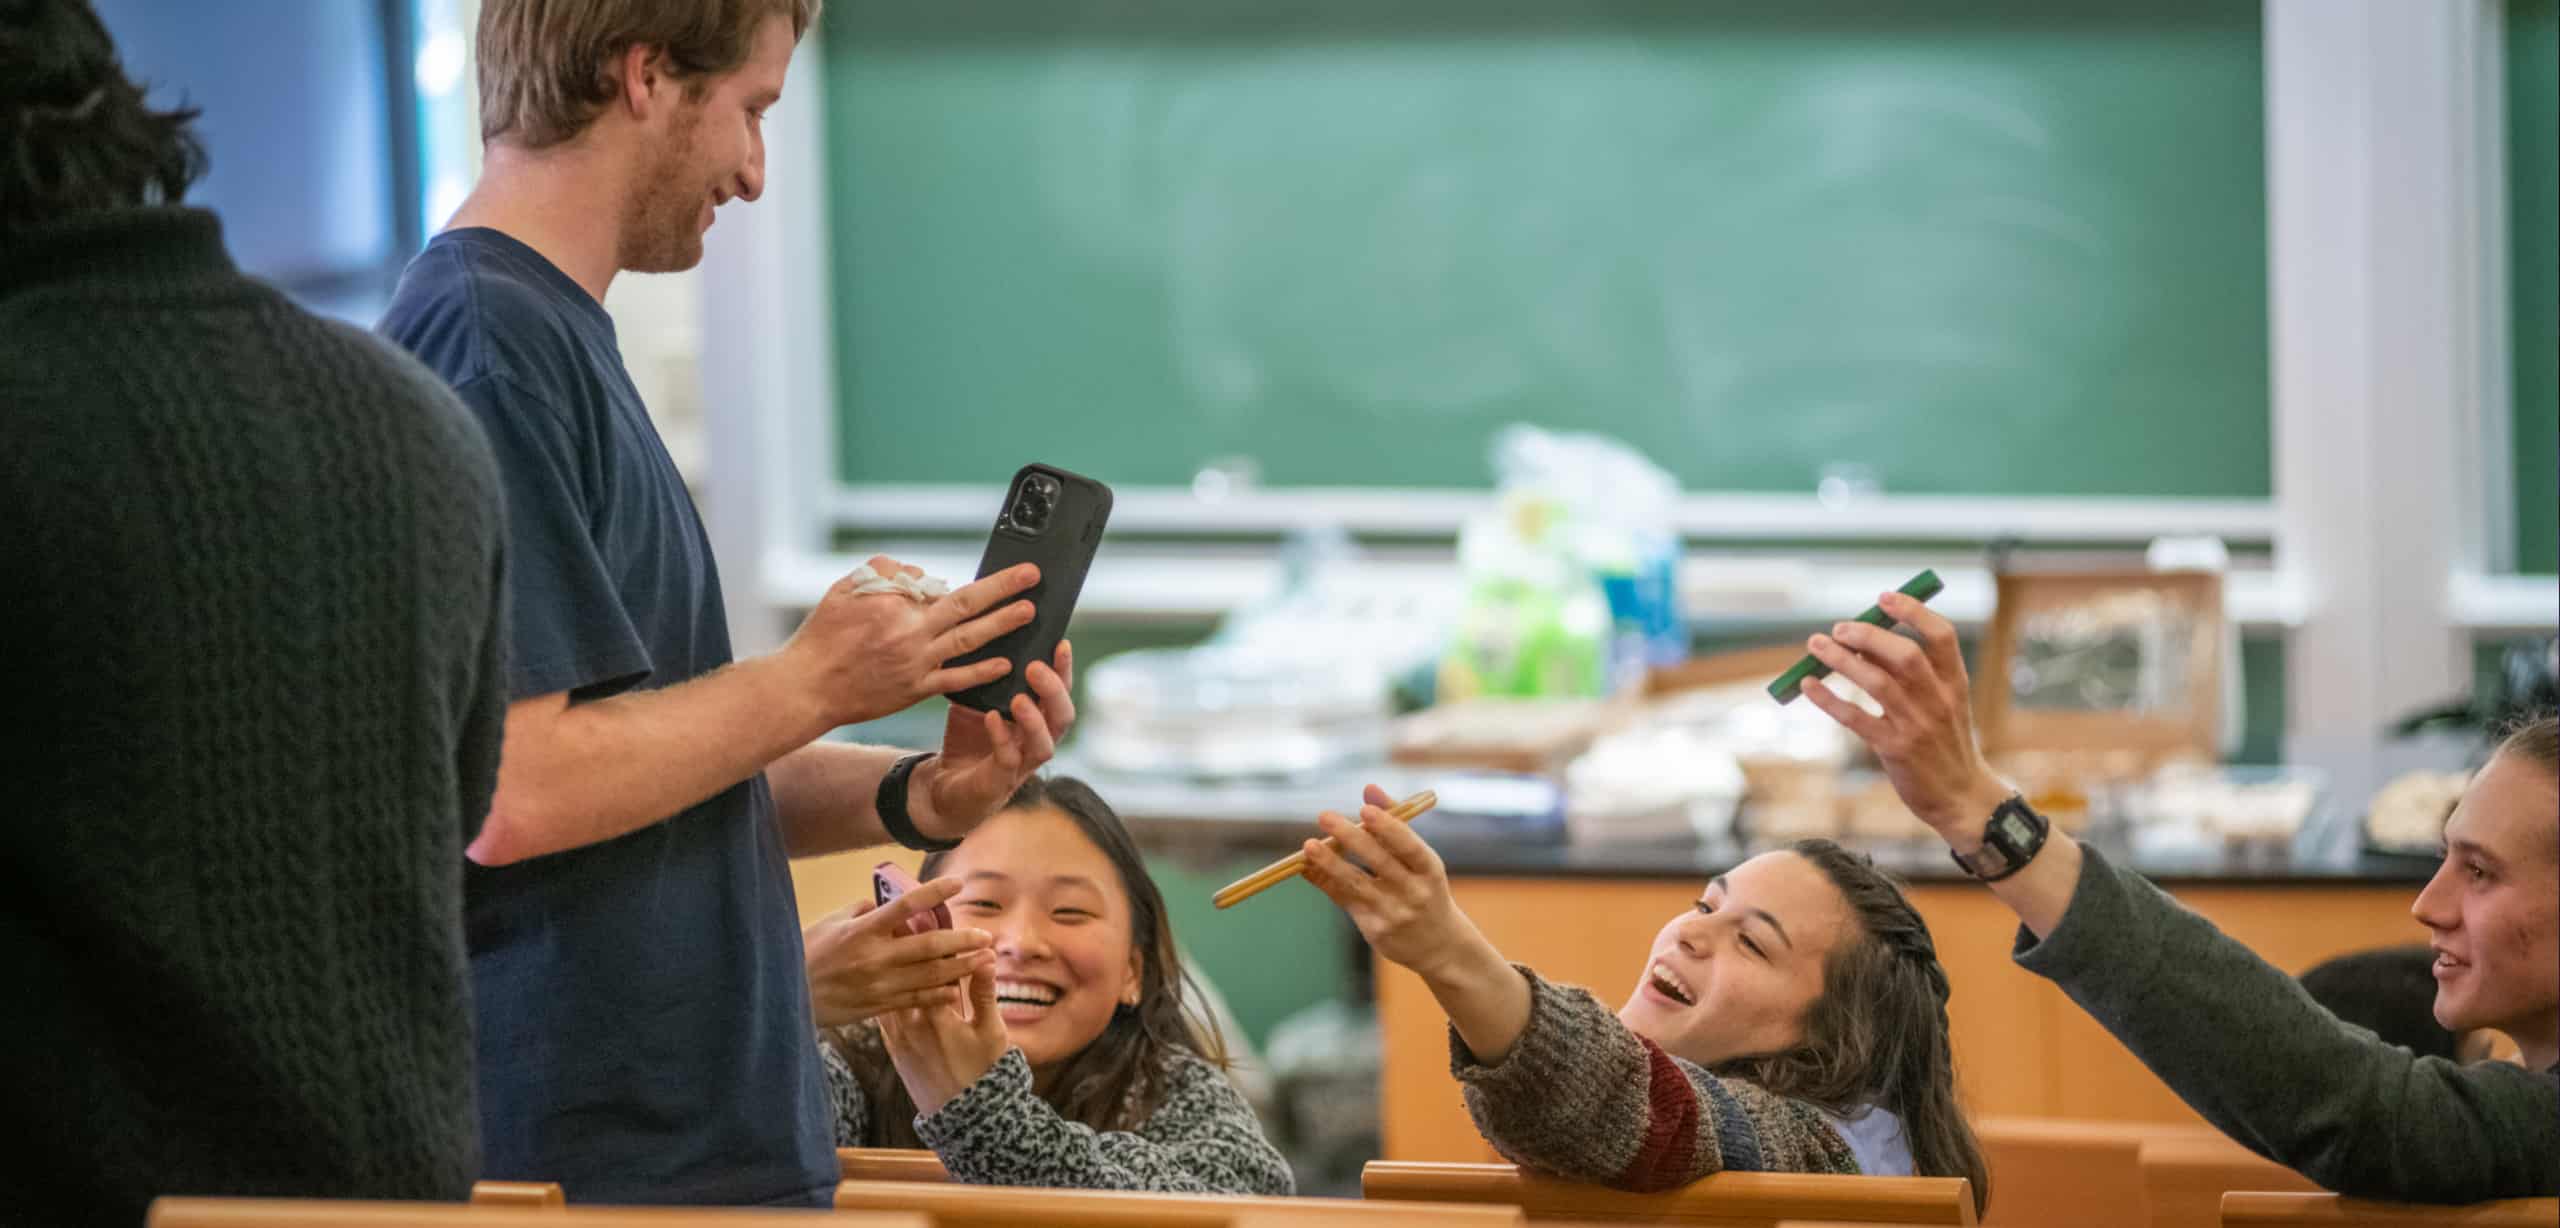 Students interact with one another with their phones